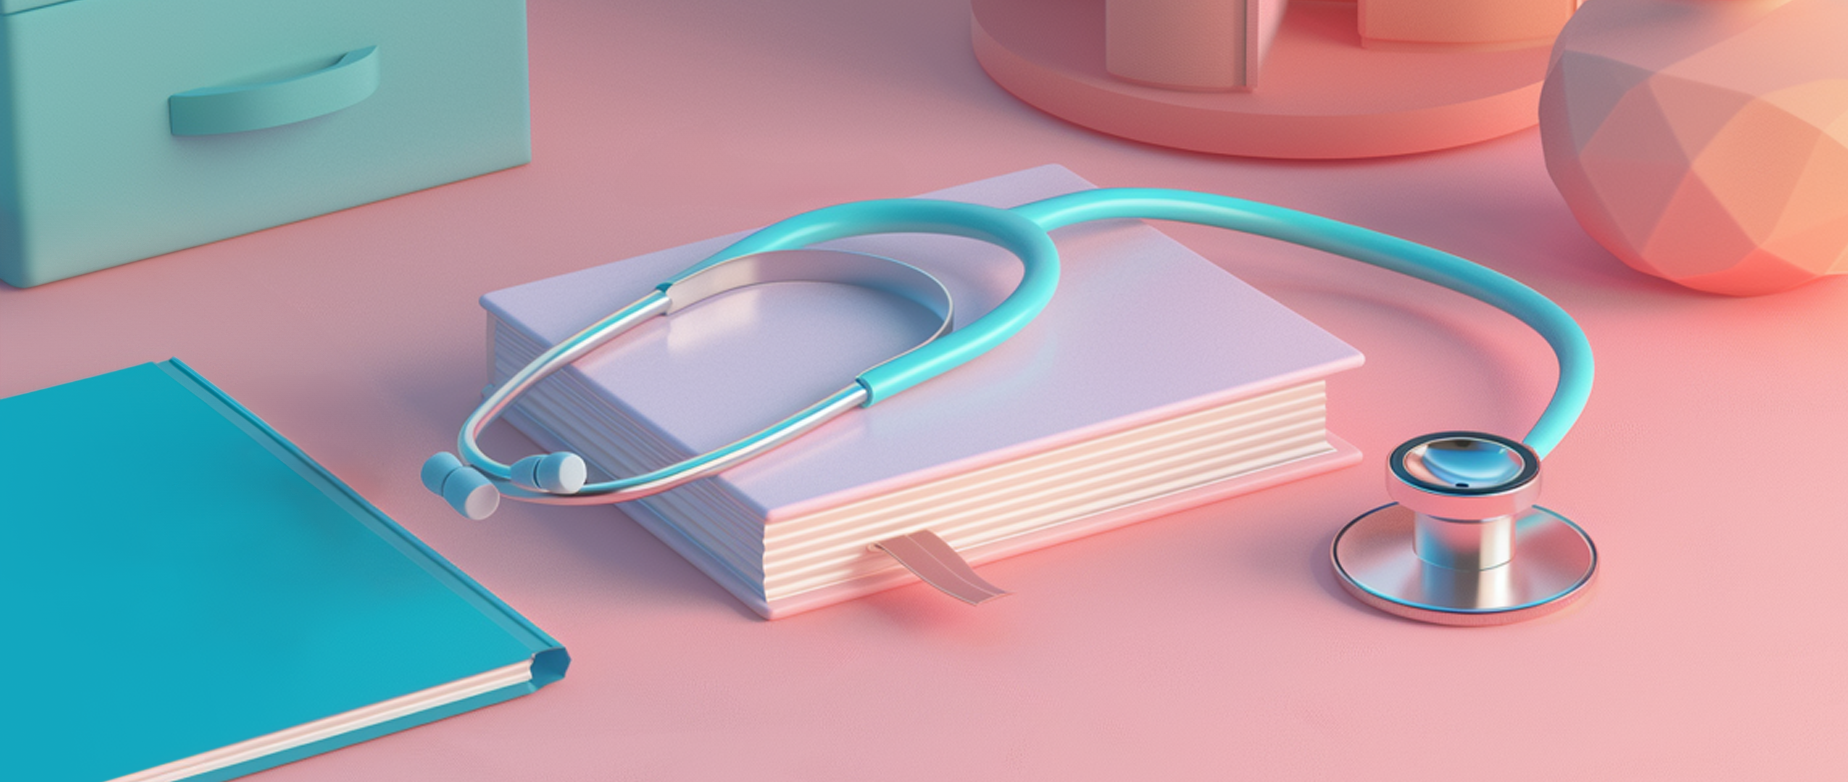 A stethoscope on a notebook on a pink desk.